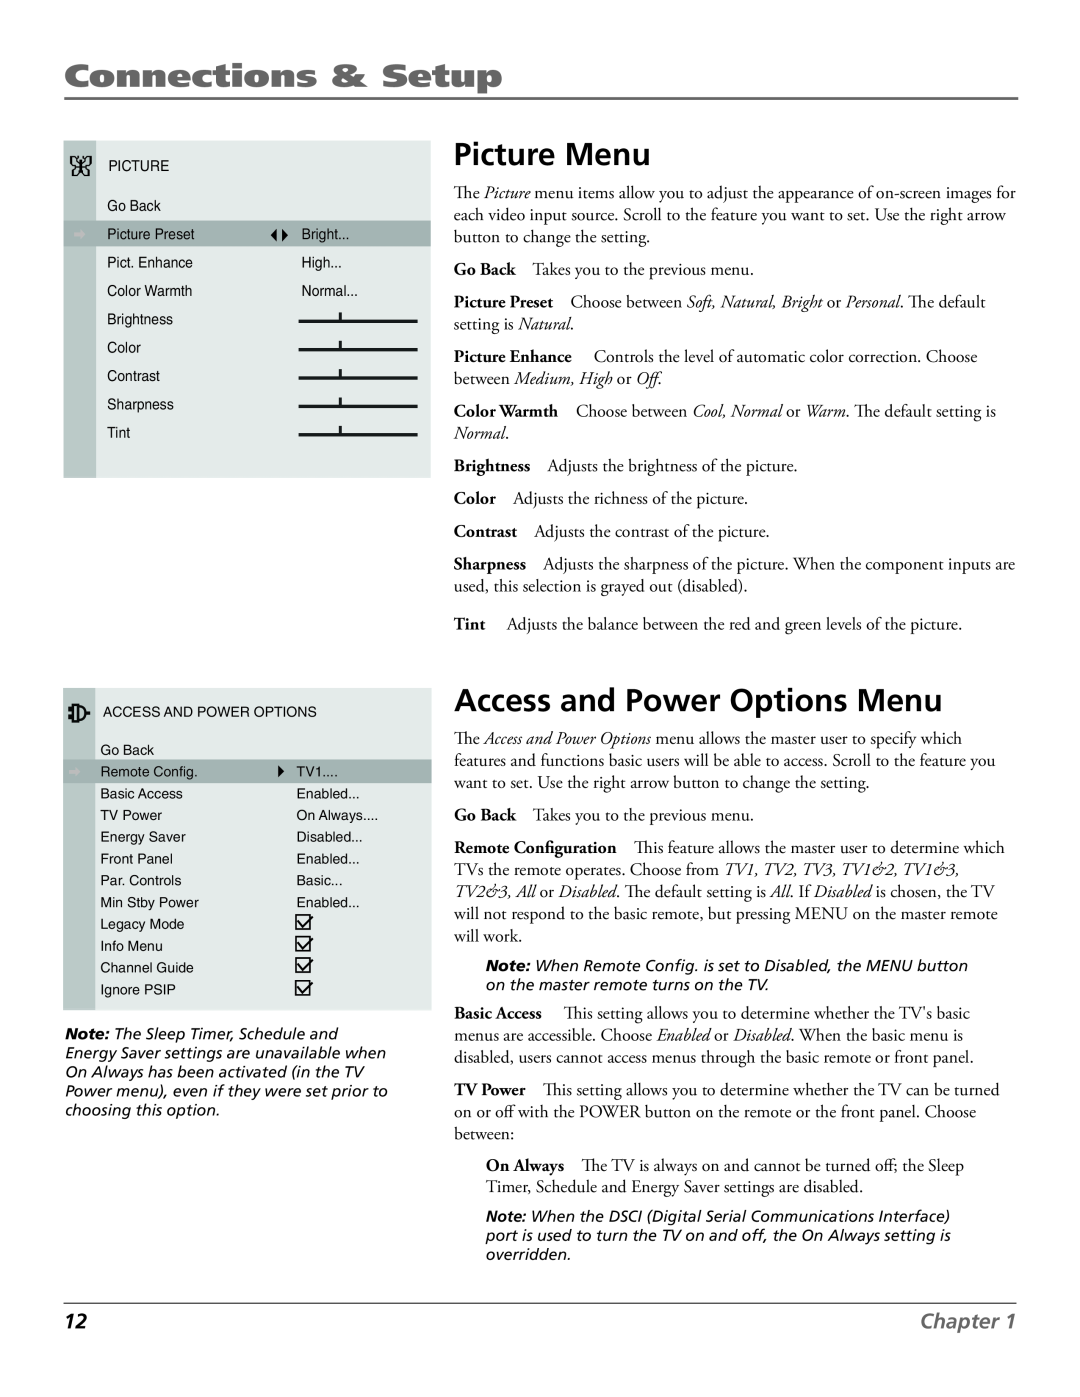 RCA J27F636 manual Picture Menu, Access and Power Options Menu, Connections & Setup, Chapter, On Always 